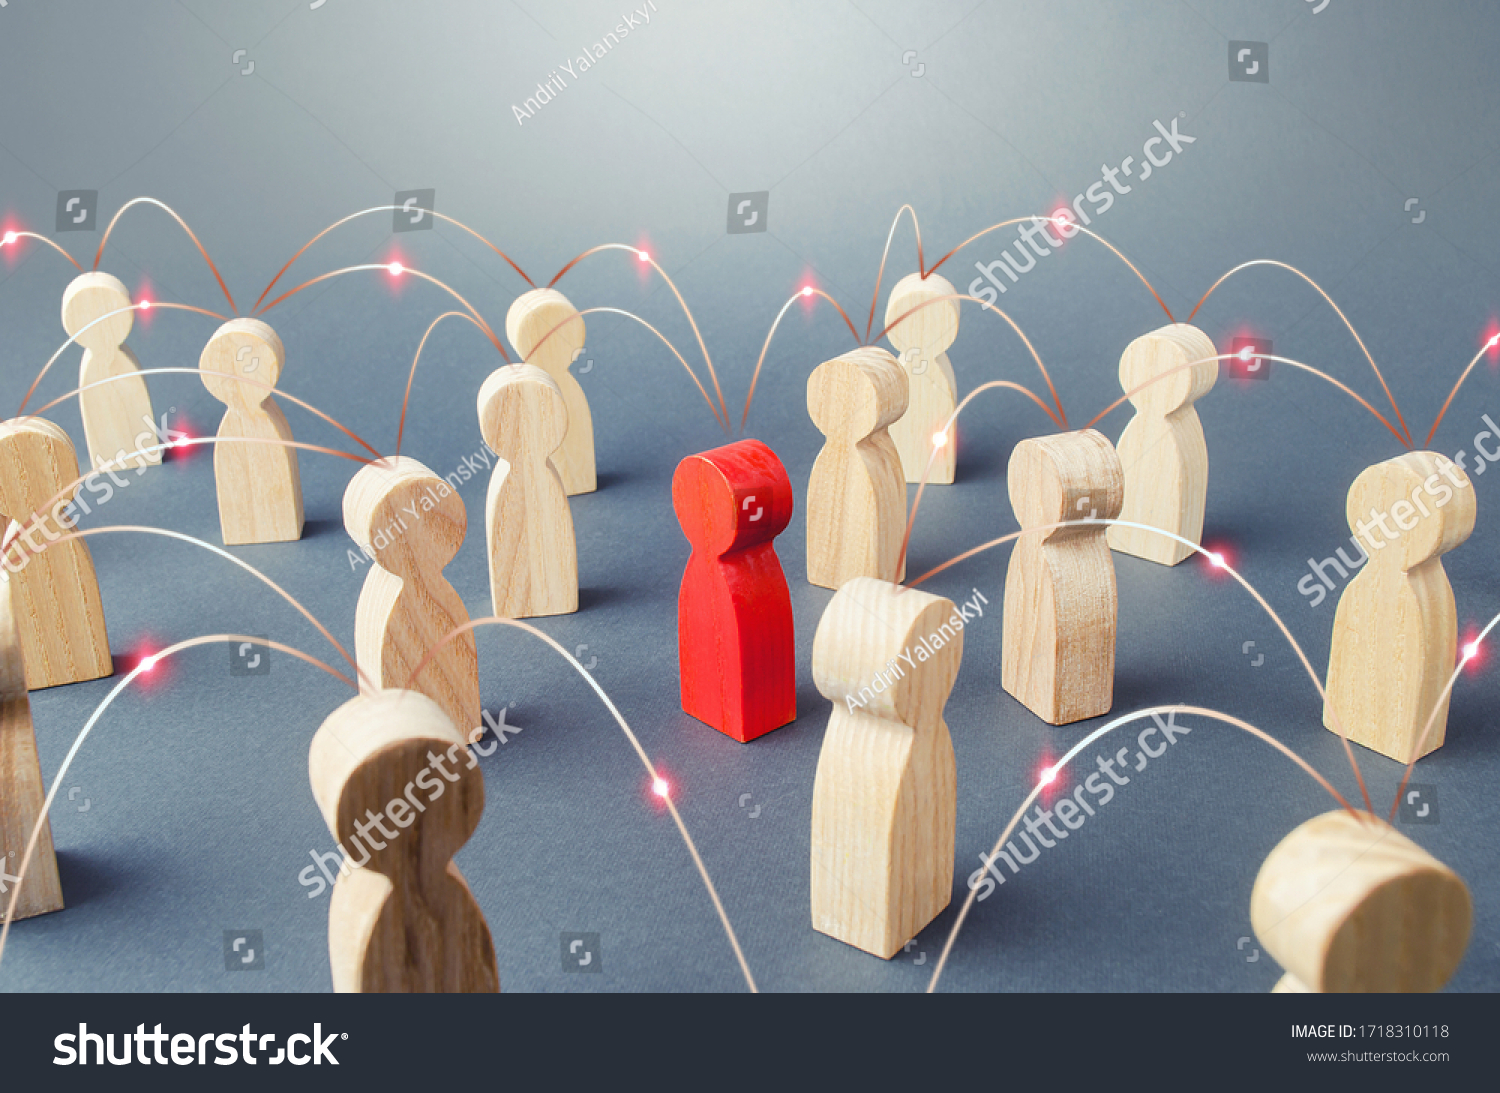 People connected people by lines. Cooperation and collaboration, news gossip spread. Teamwork. Society concept. Social science relationships. Marketing, dissemination of trends and information #1718310118